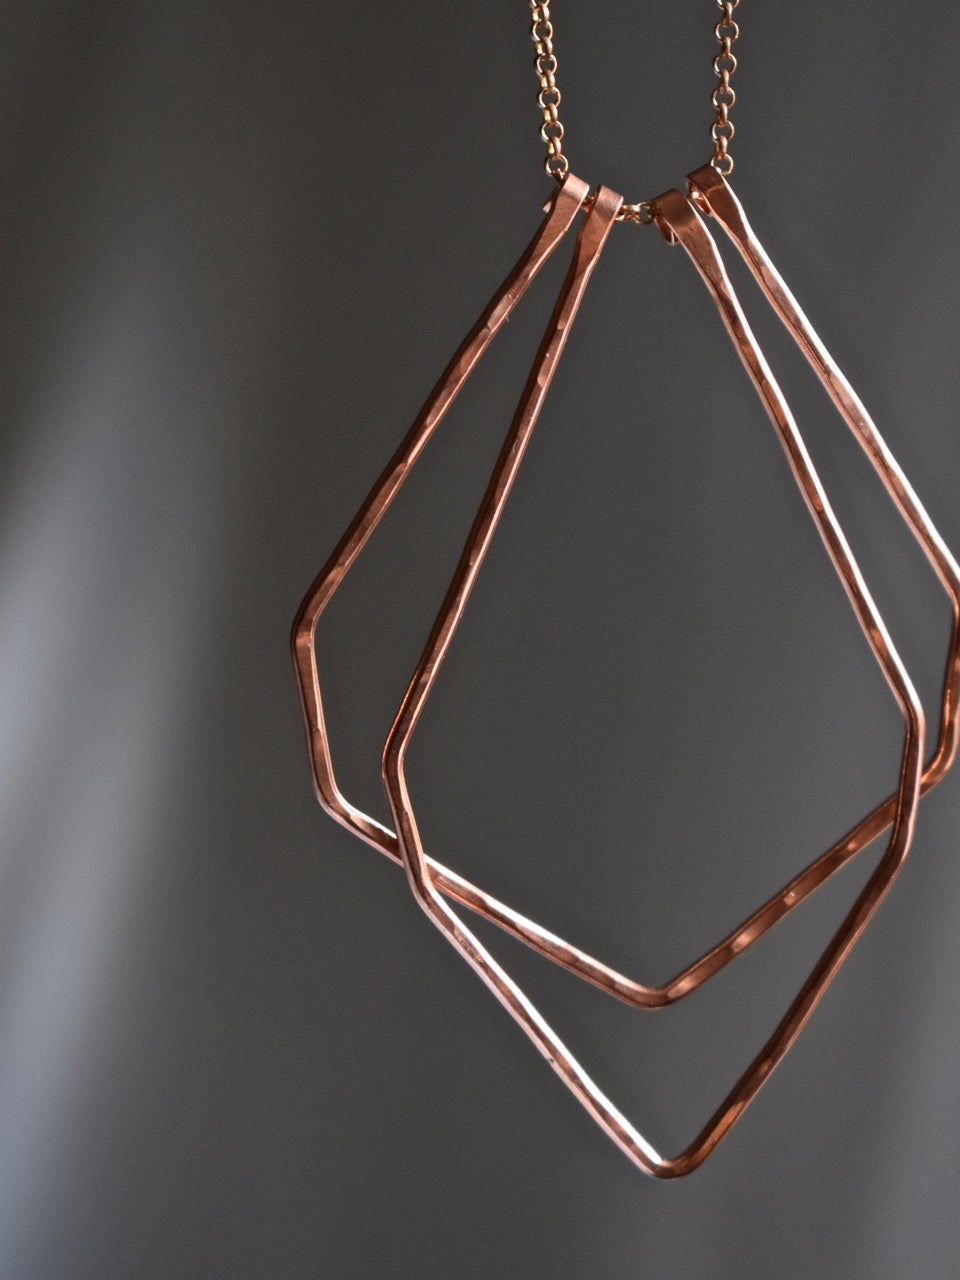 Geometric Copper Long Necklace ✴︎Herkimer✴︎L✴︎